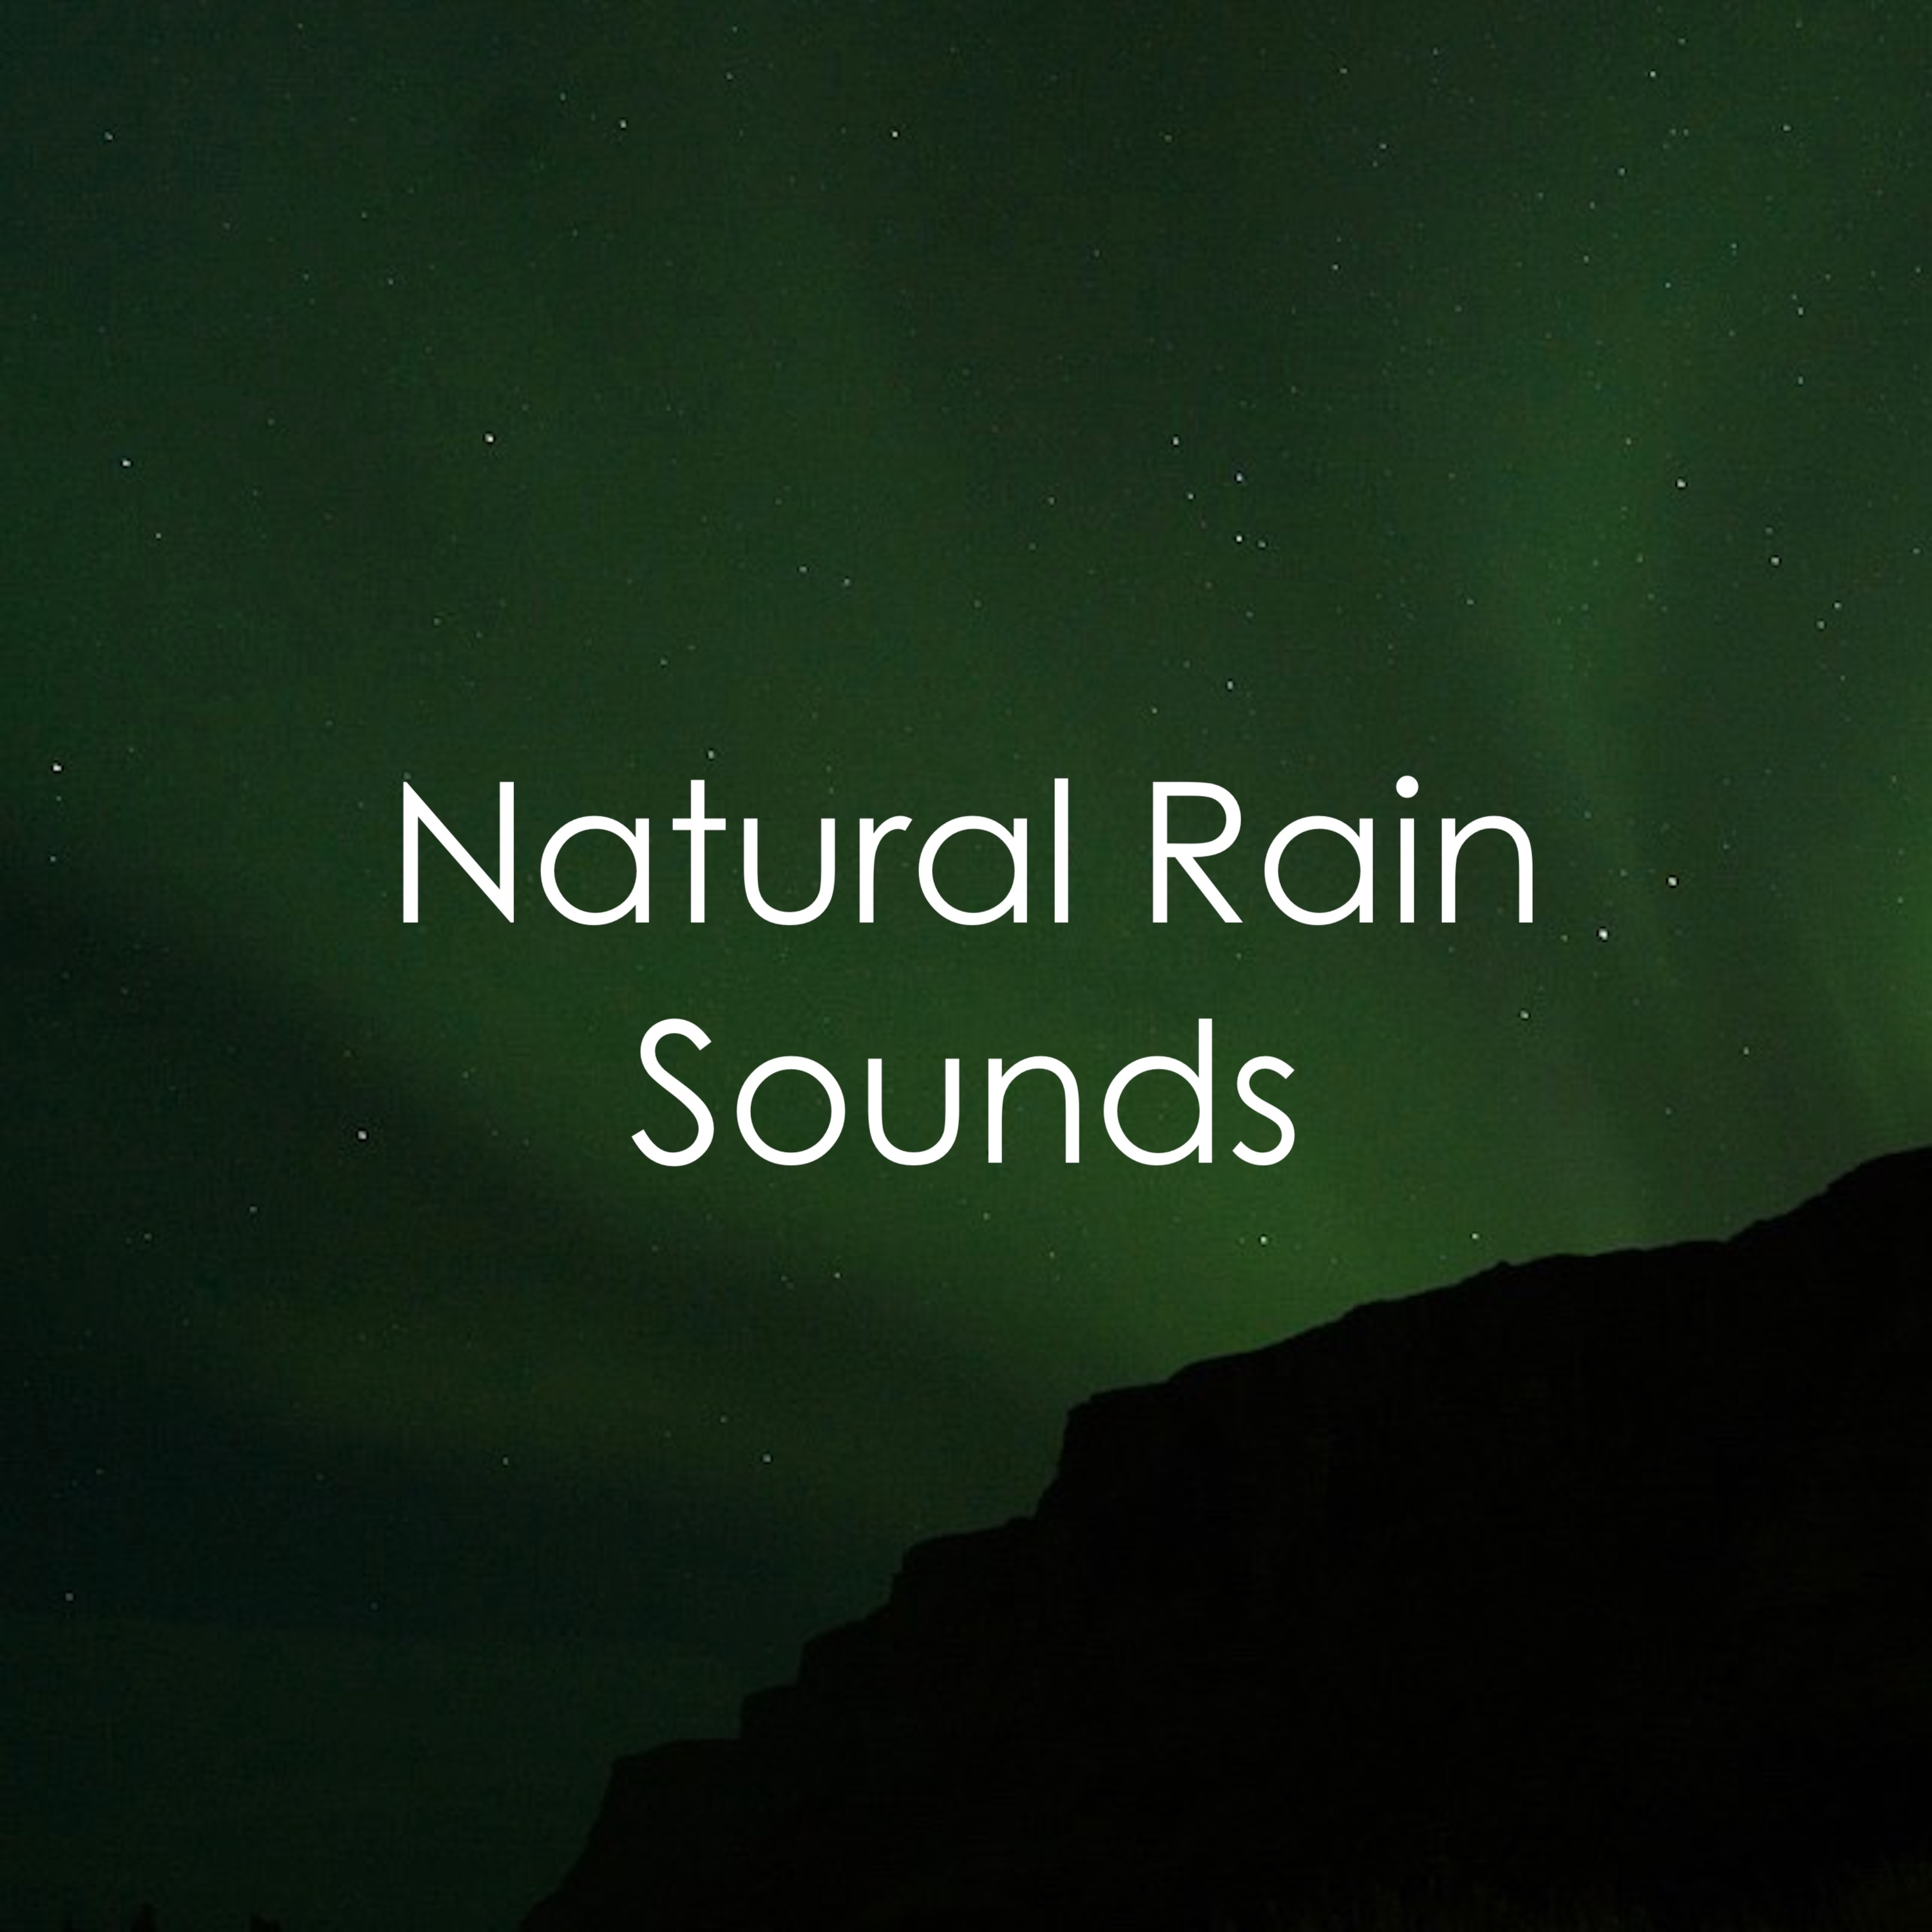 17 Sounds of Nature, White Noise and Rain Sounds, Yoga, Relax, Peace, Zen, Wellbeing